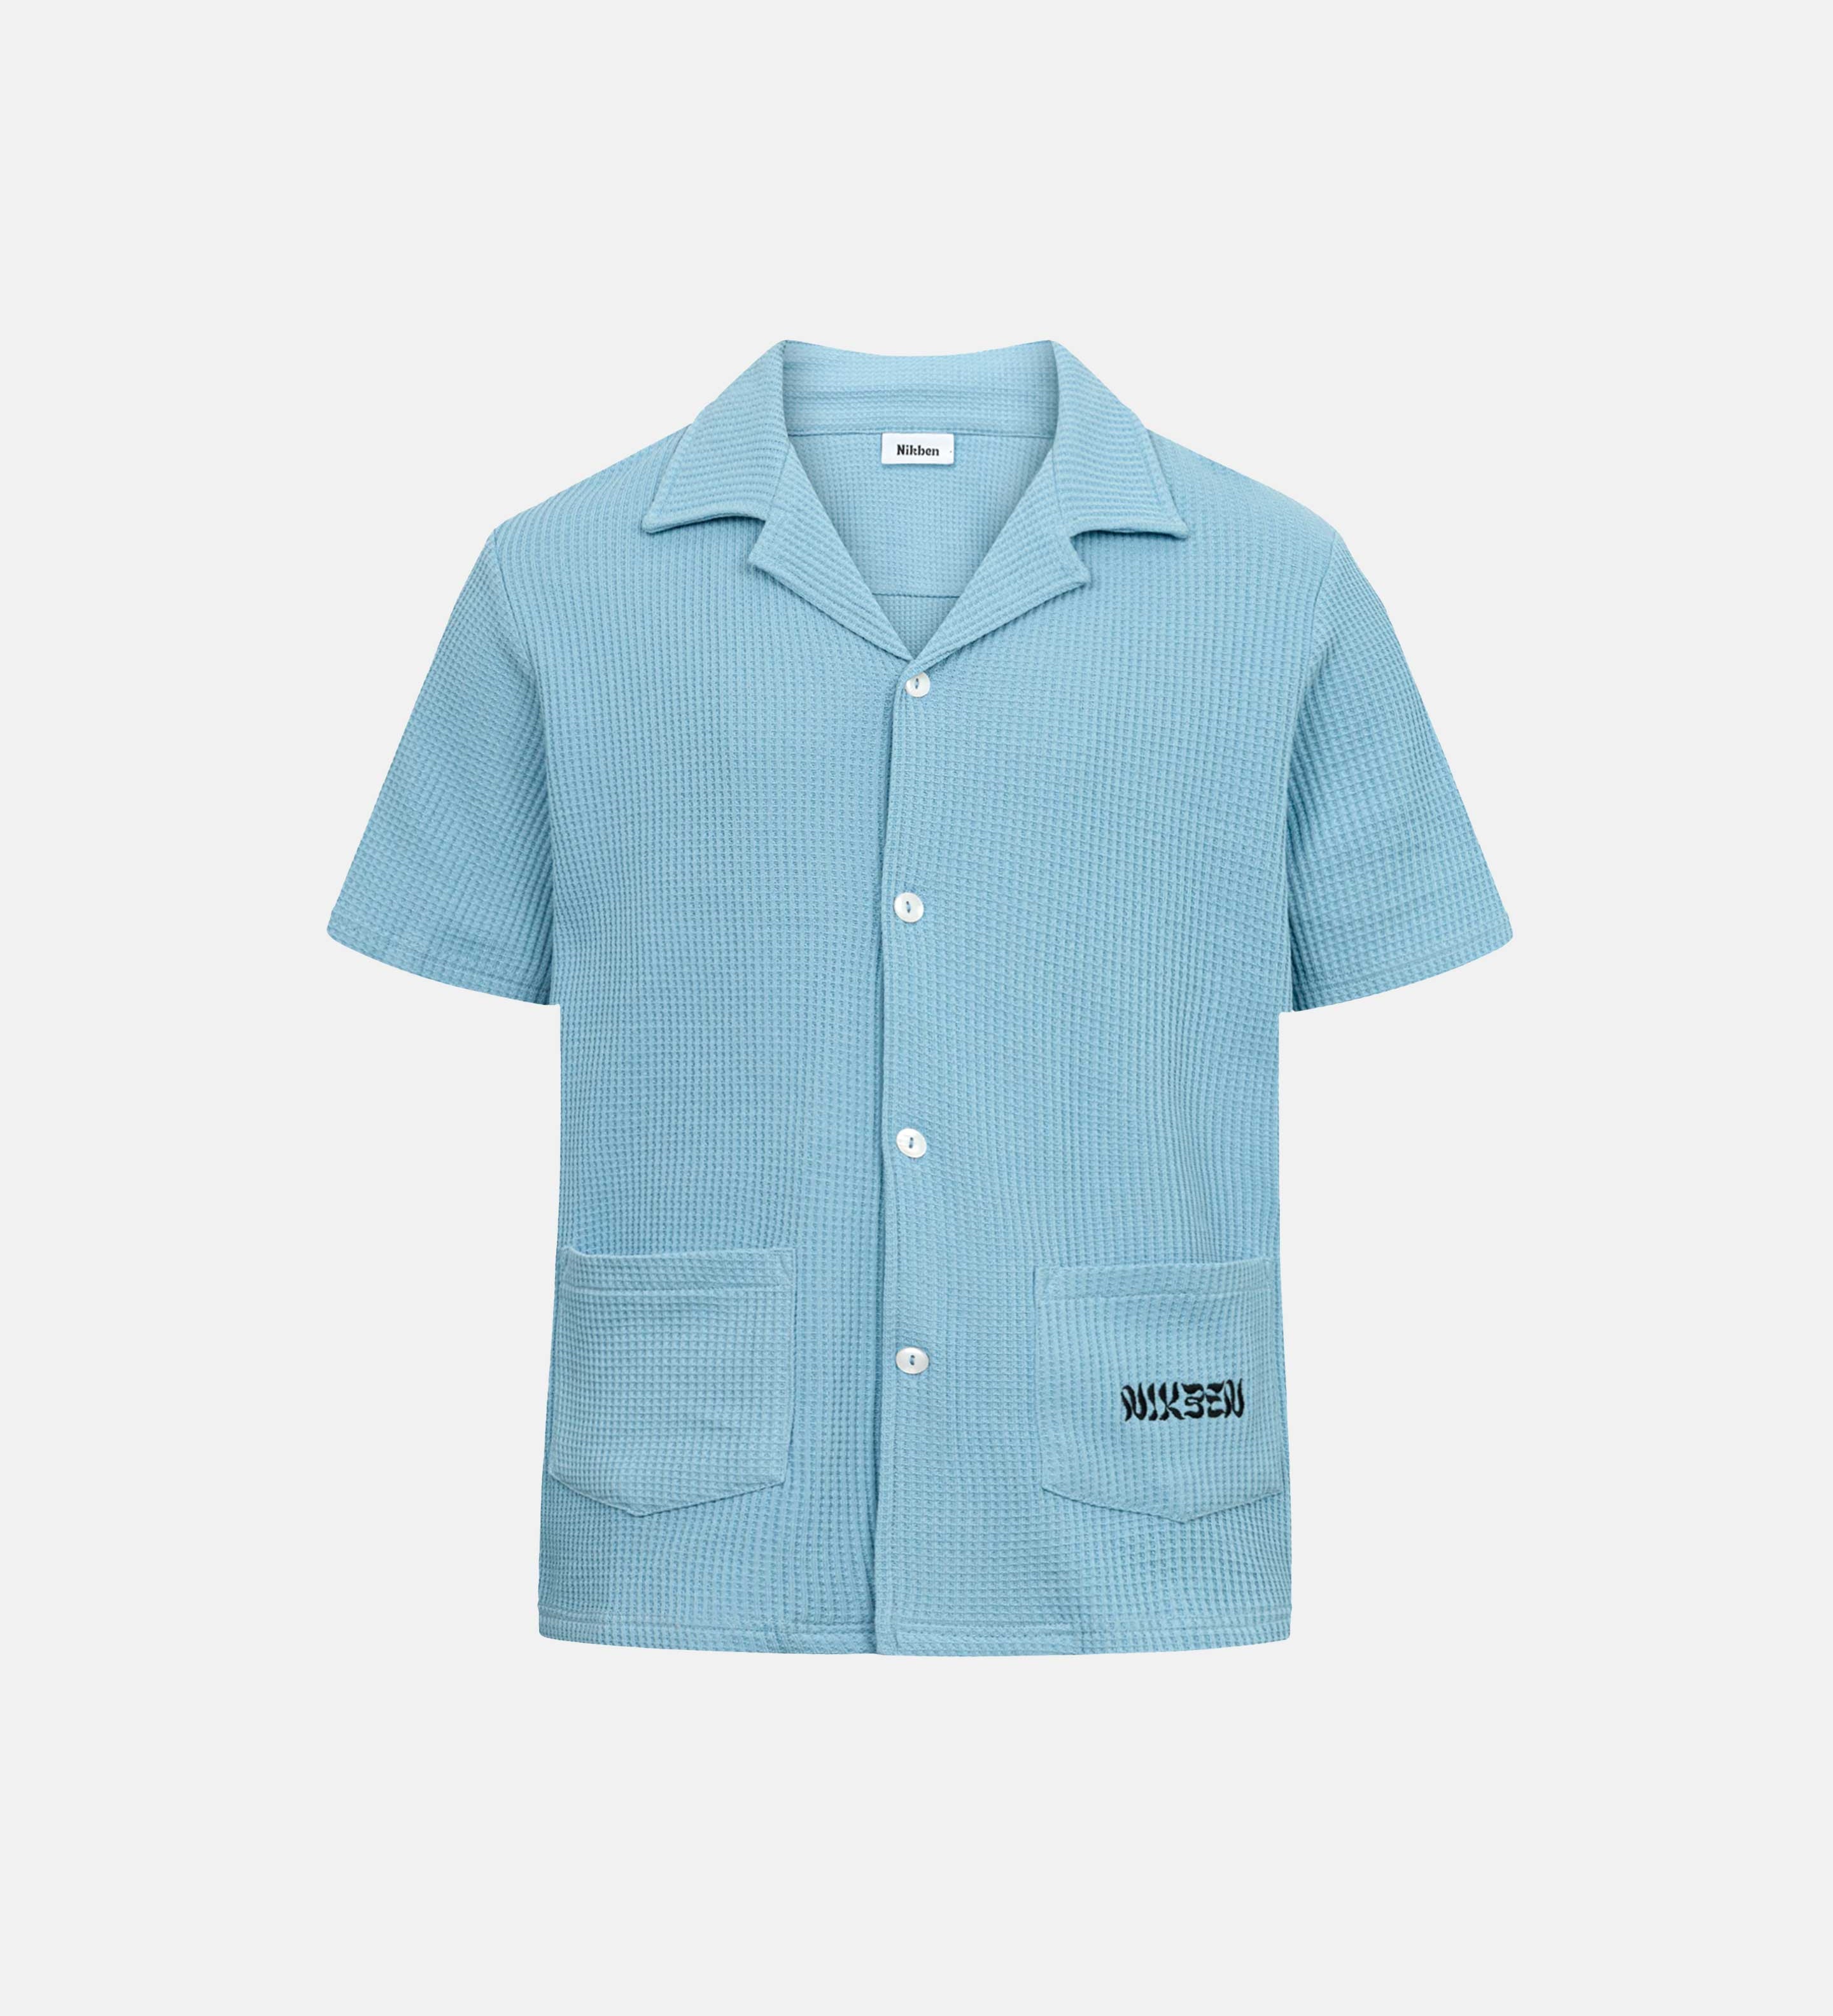 Sky blue waffle-patterned short-sleeved shirt with two front pockets, featuring a stitched black Nikben logo on the left pocket and button closure.